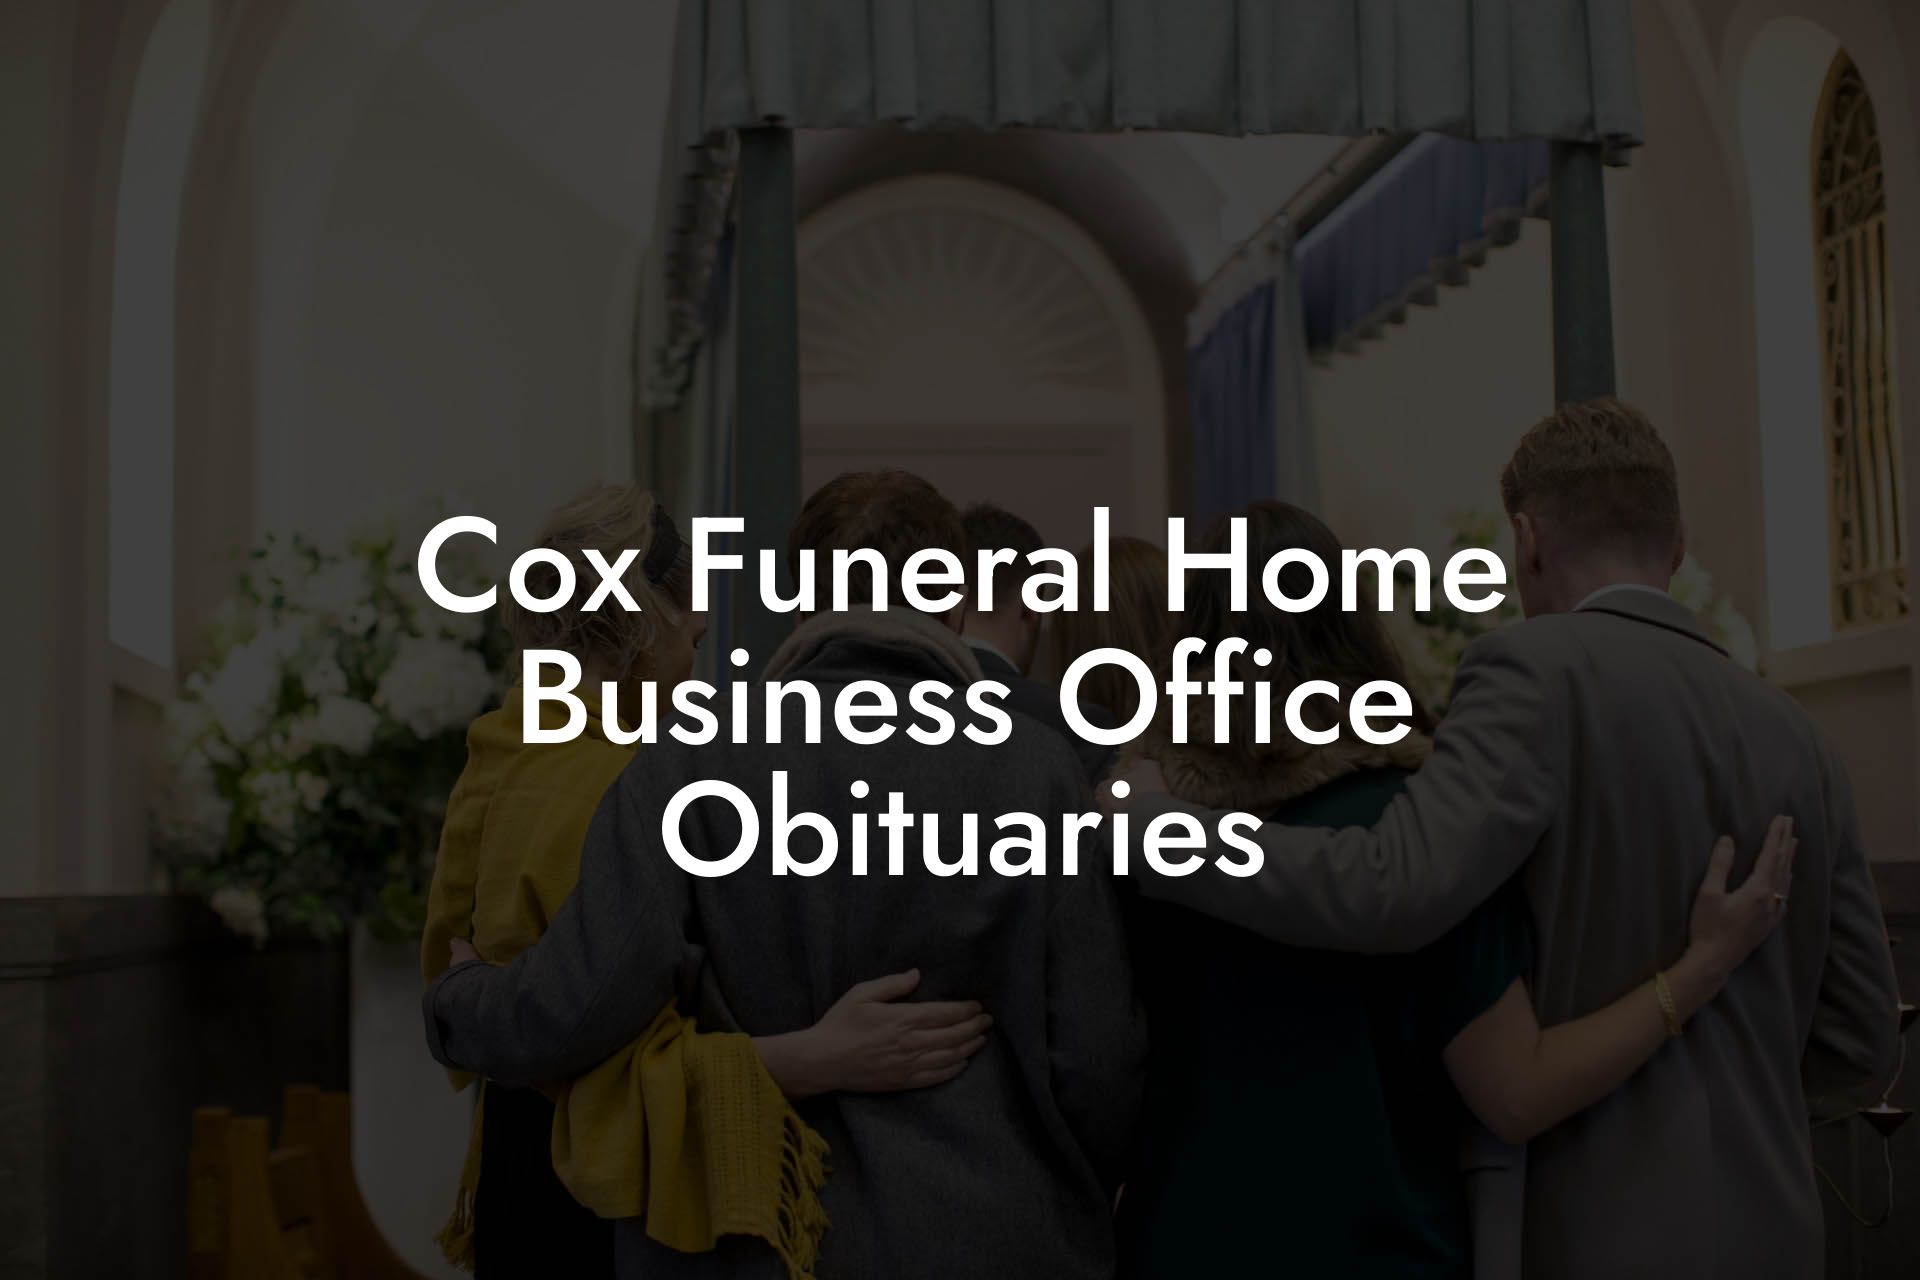 Cox Funeral Home Business Office Obituaries